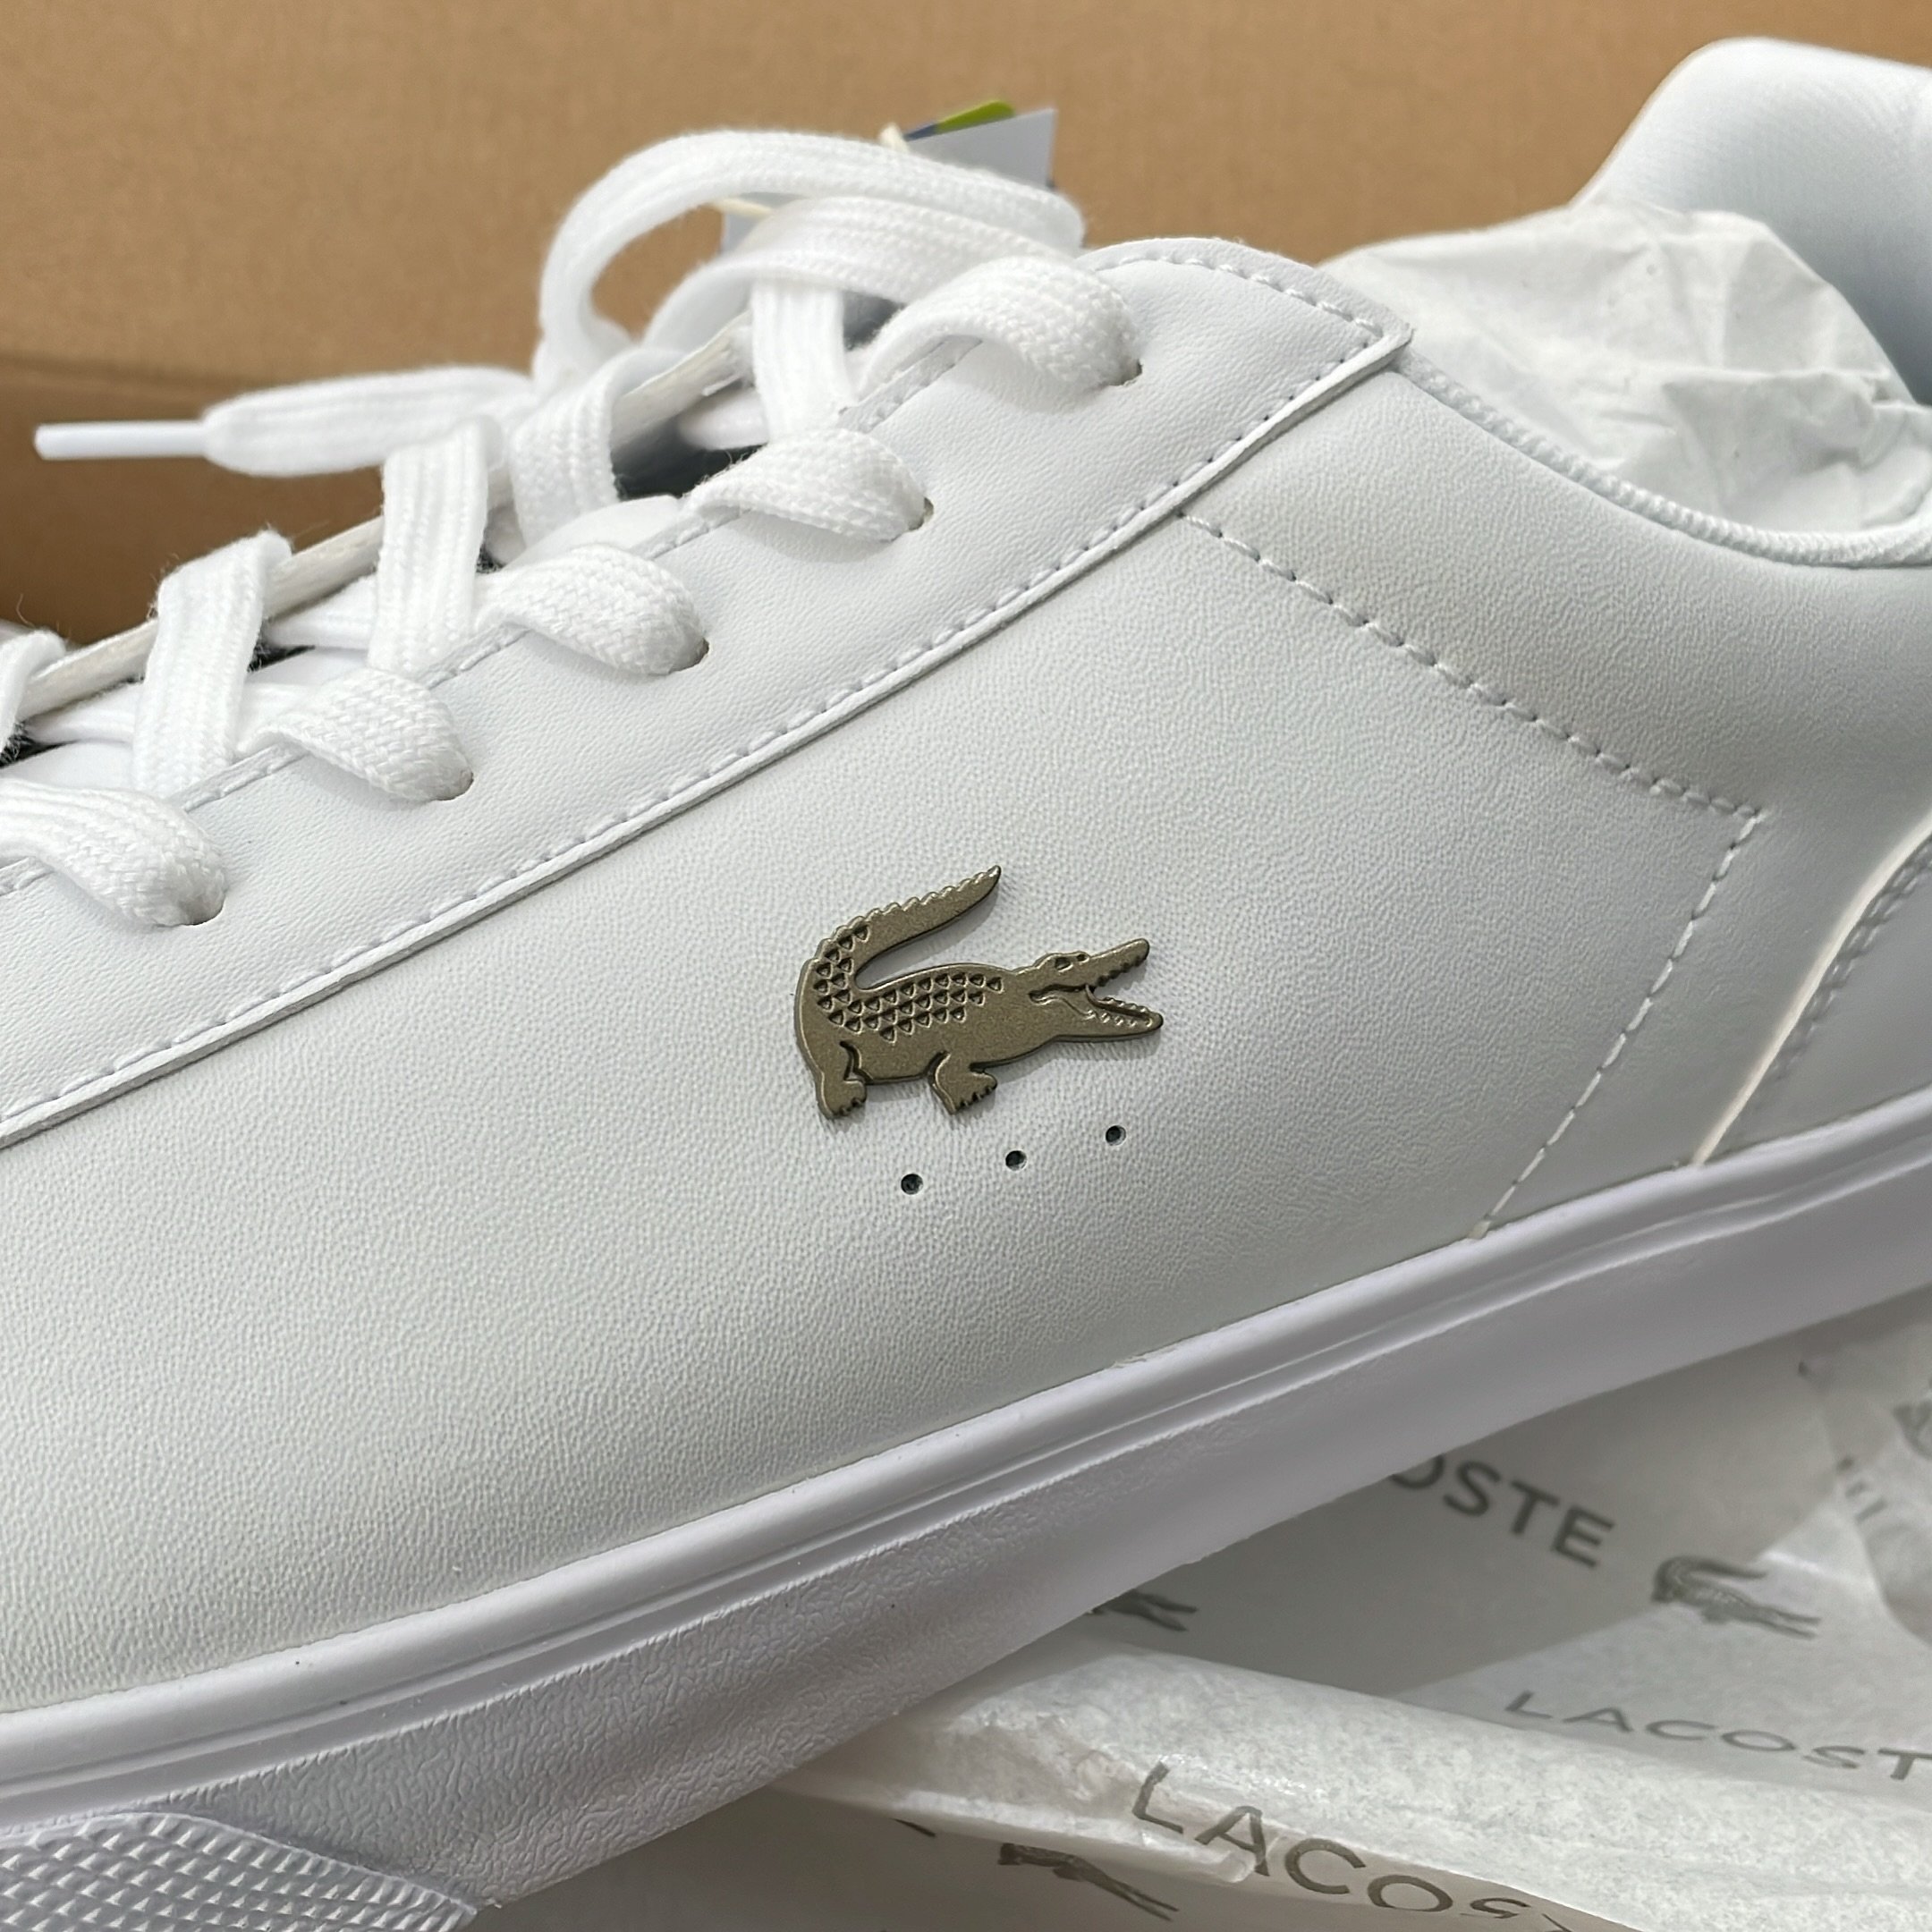 Check out what just landed! Not in the website yet, get in touch if they&rsquo;re your thing&hellip; 😍

#lacoste #kicks #trainers #spring #summer #new #justarrived #style #confidence #menswear #Dorking #Reigate #Surrey